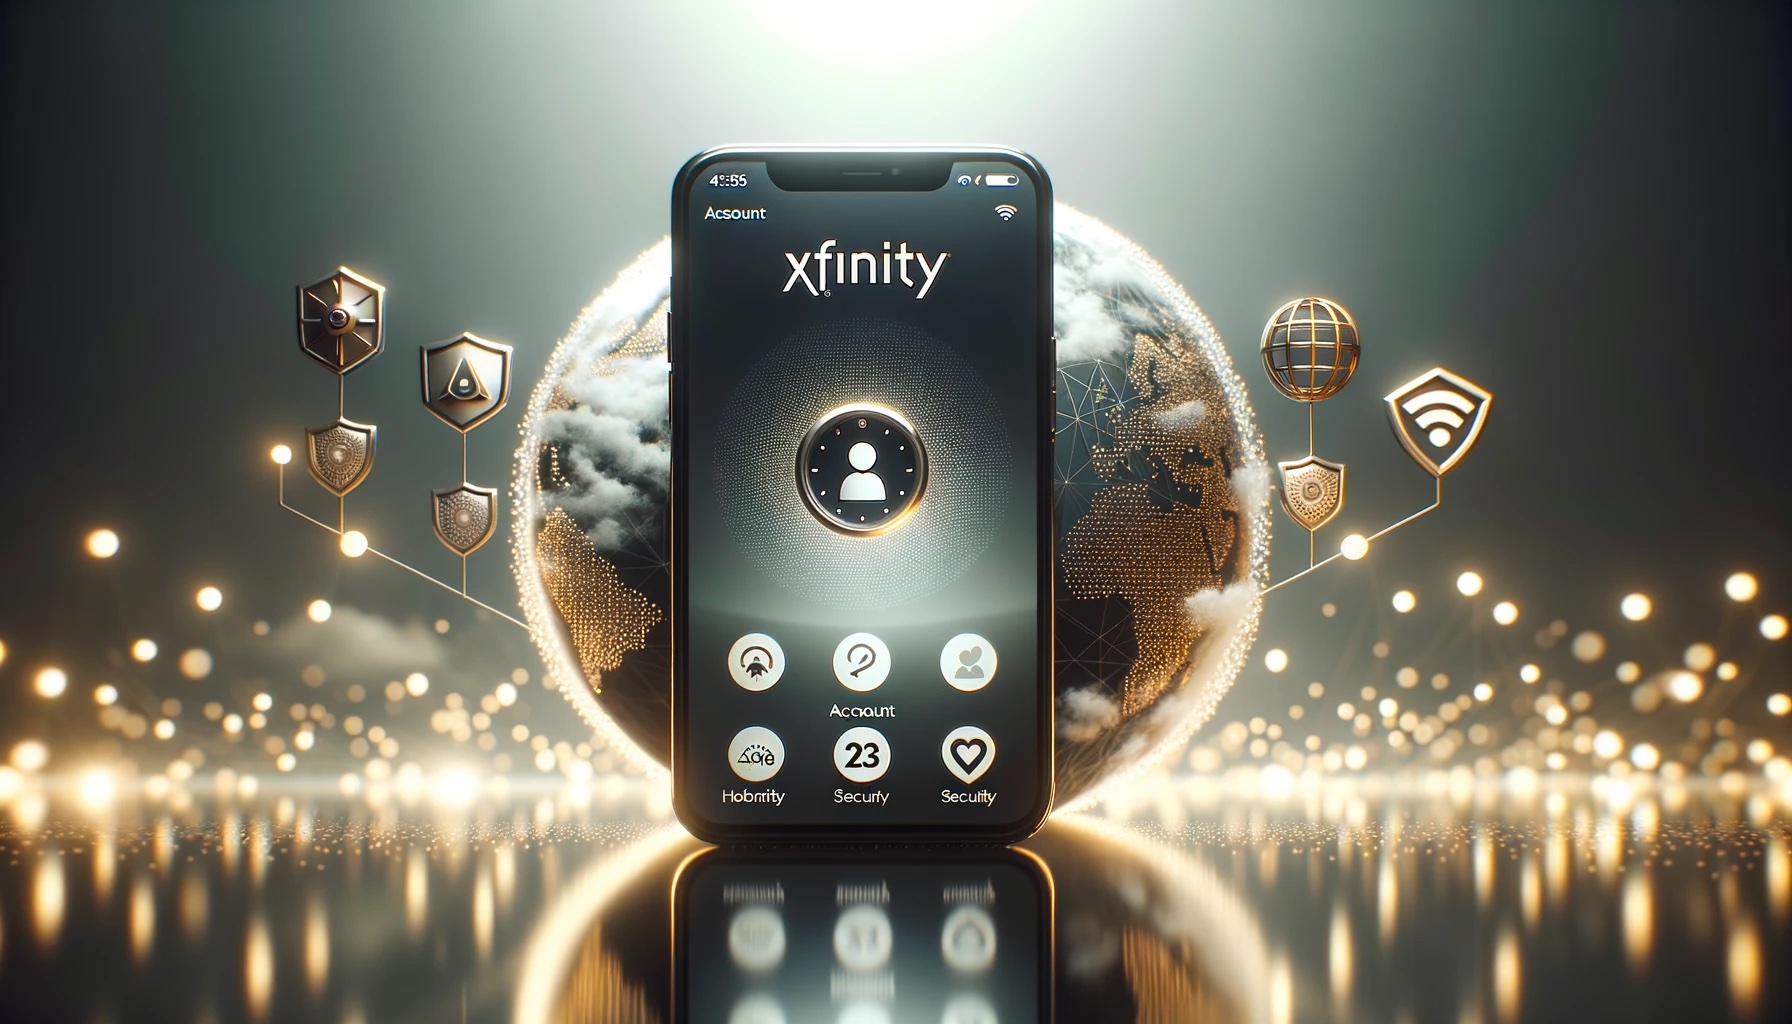 Smartphone displaying Xfinity App dashboard with background icons representing 24/7 support, security, account management, and WiFi signal.